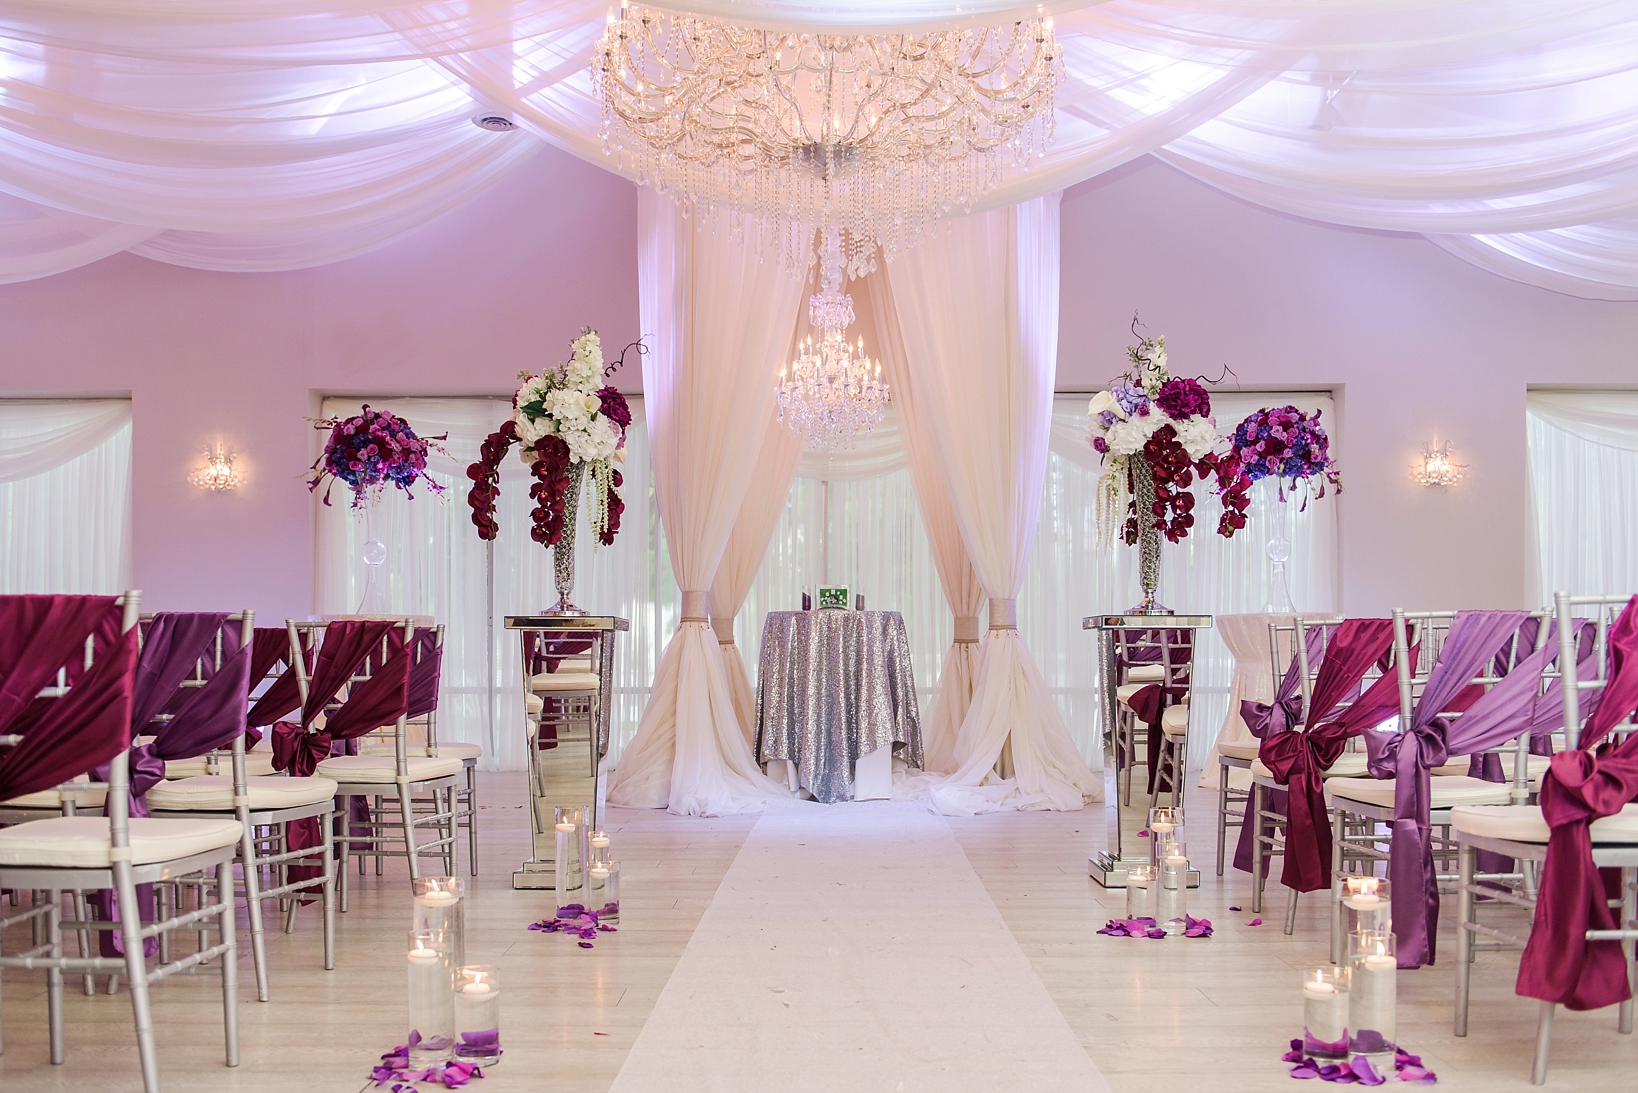 The ceremony space at the crystal ballroom in Clearwater, FL with pink uplights 